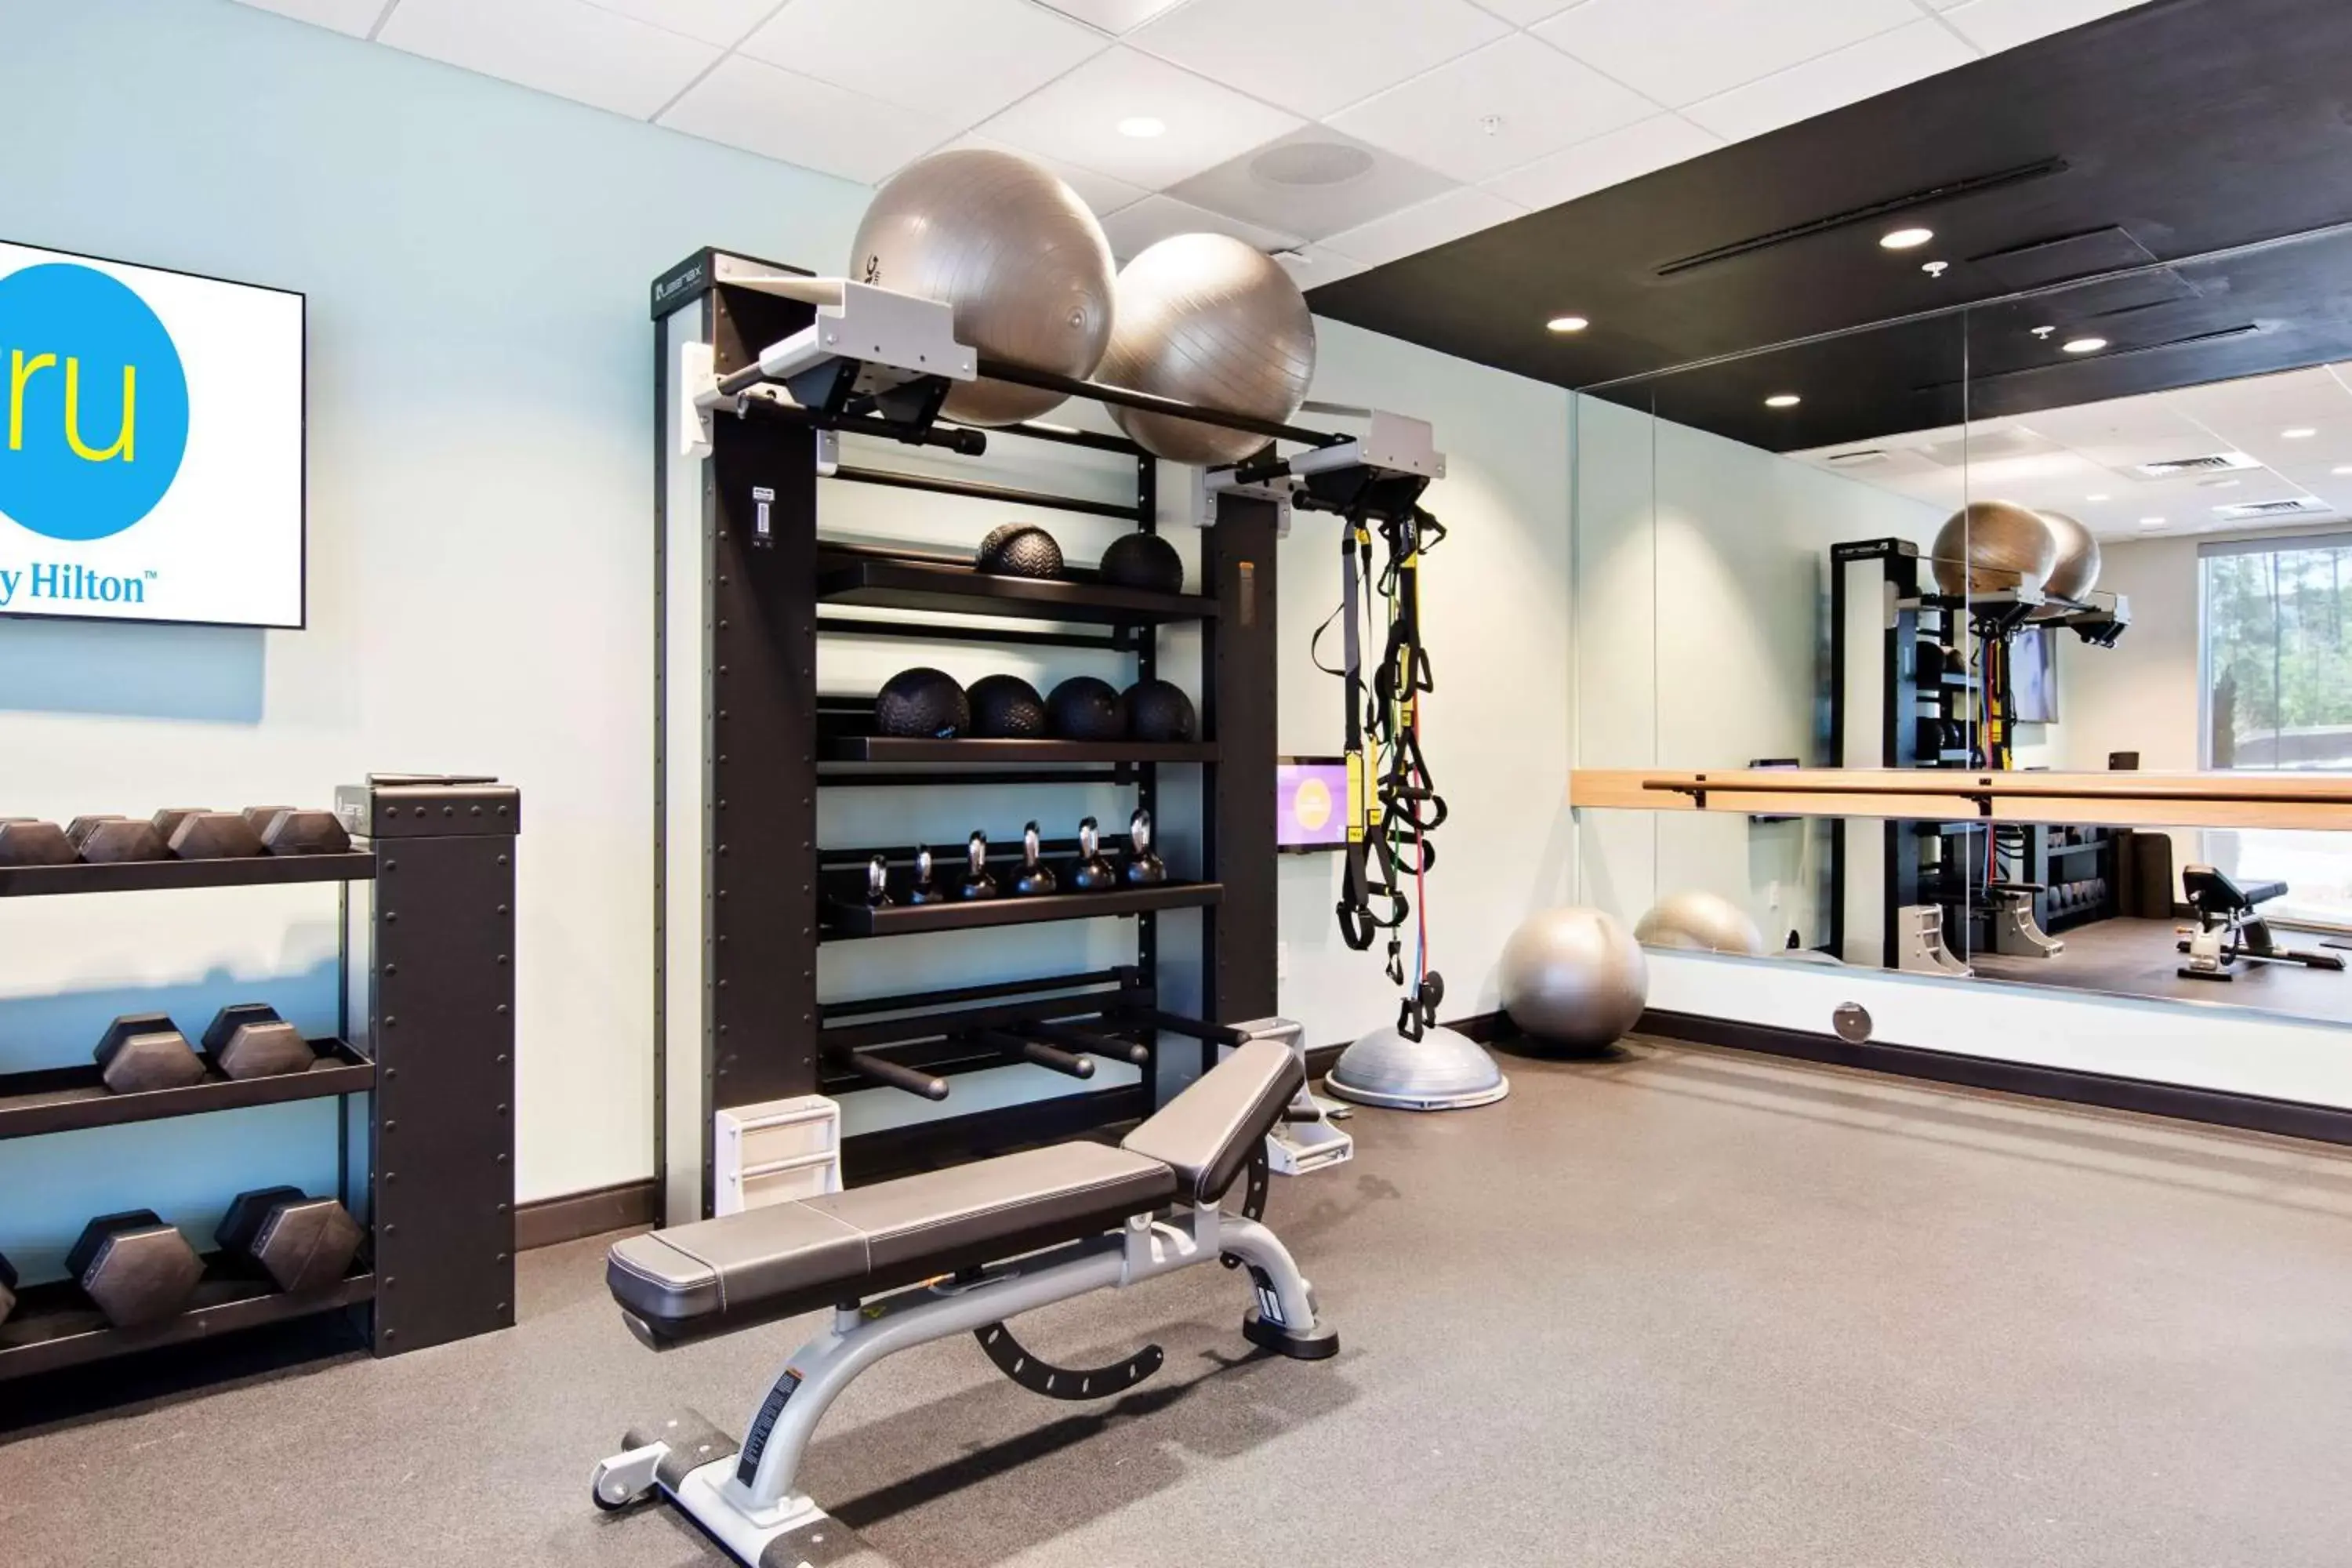 Fitness centre/facilities, Fitness Center/Facilities in Tru By Hilton Chapel Hill